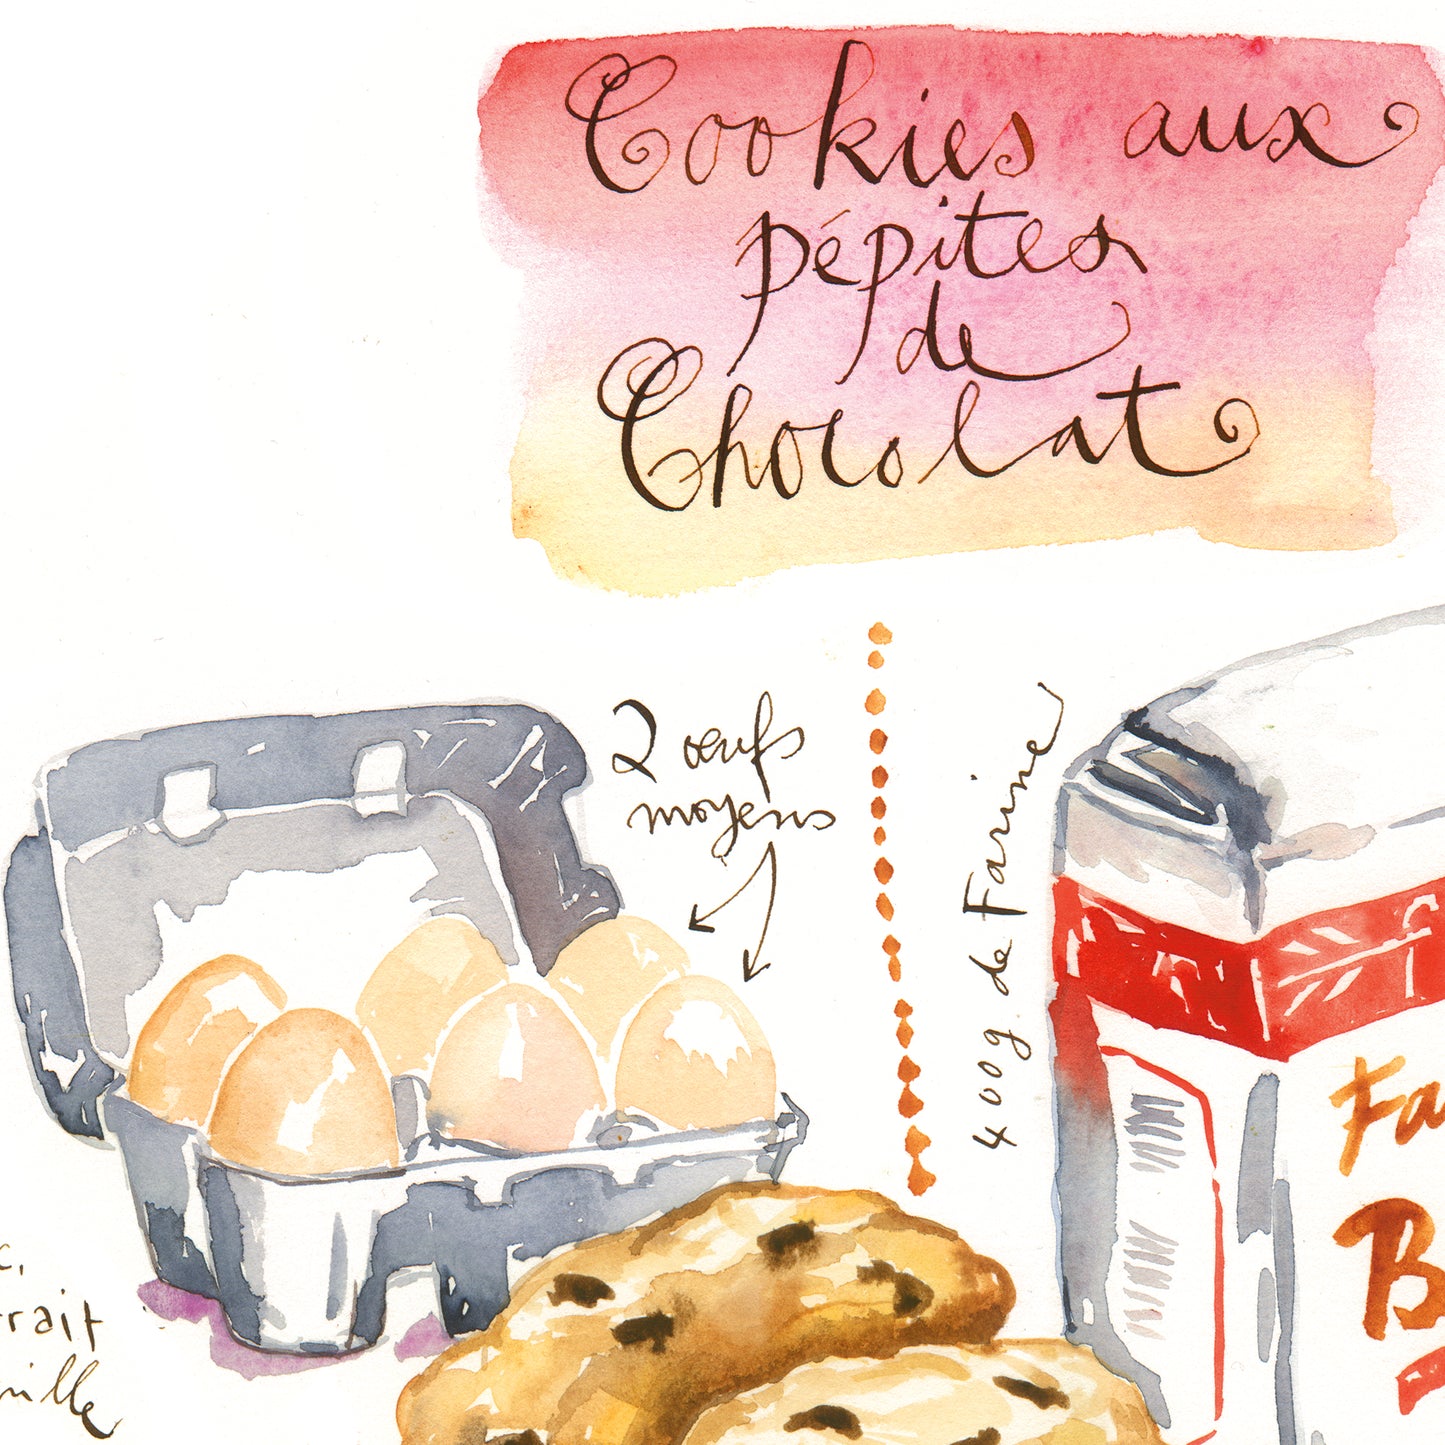 Chocolate chip cookie recipe in French - Cookies aux pépites de chocolat